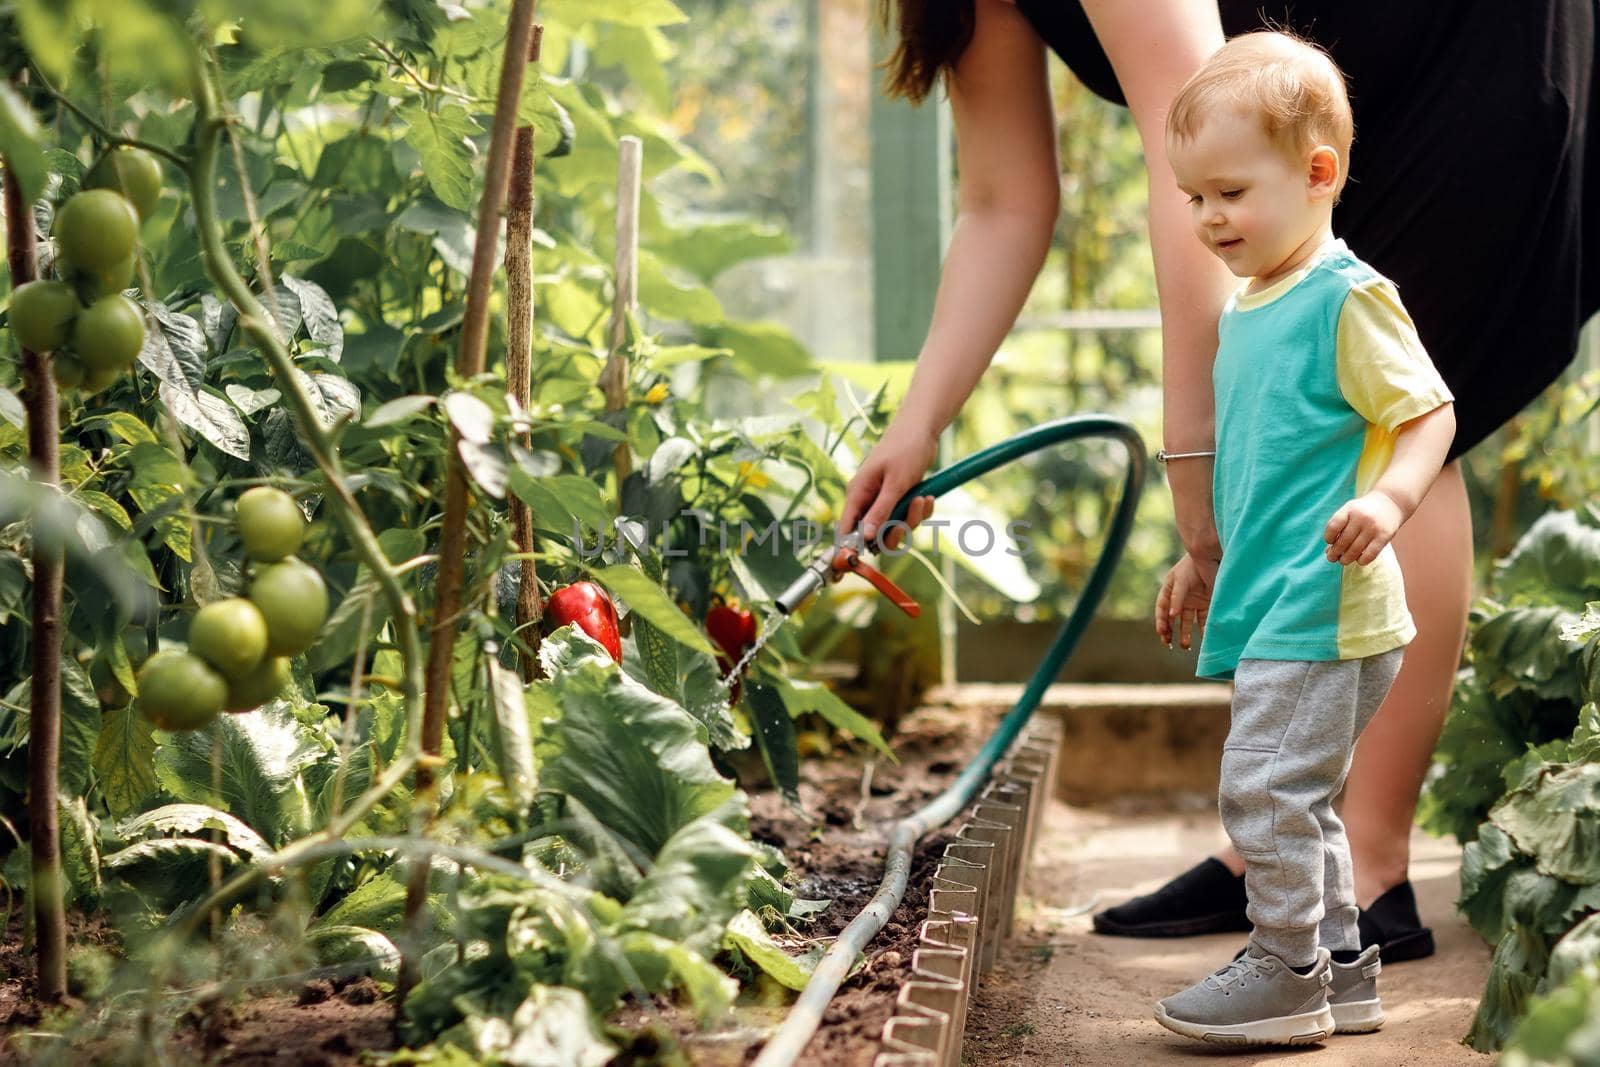 Woman shows her little son how to water plants in a greenhouse.